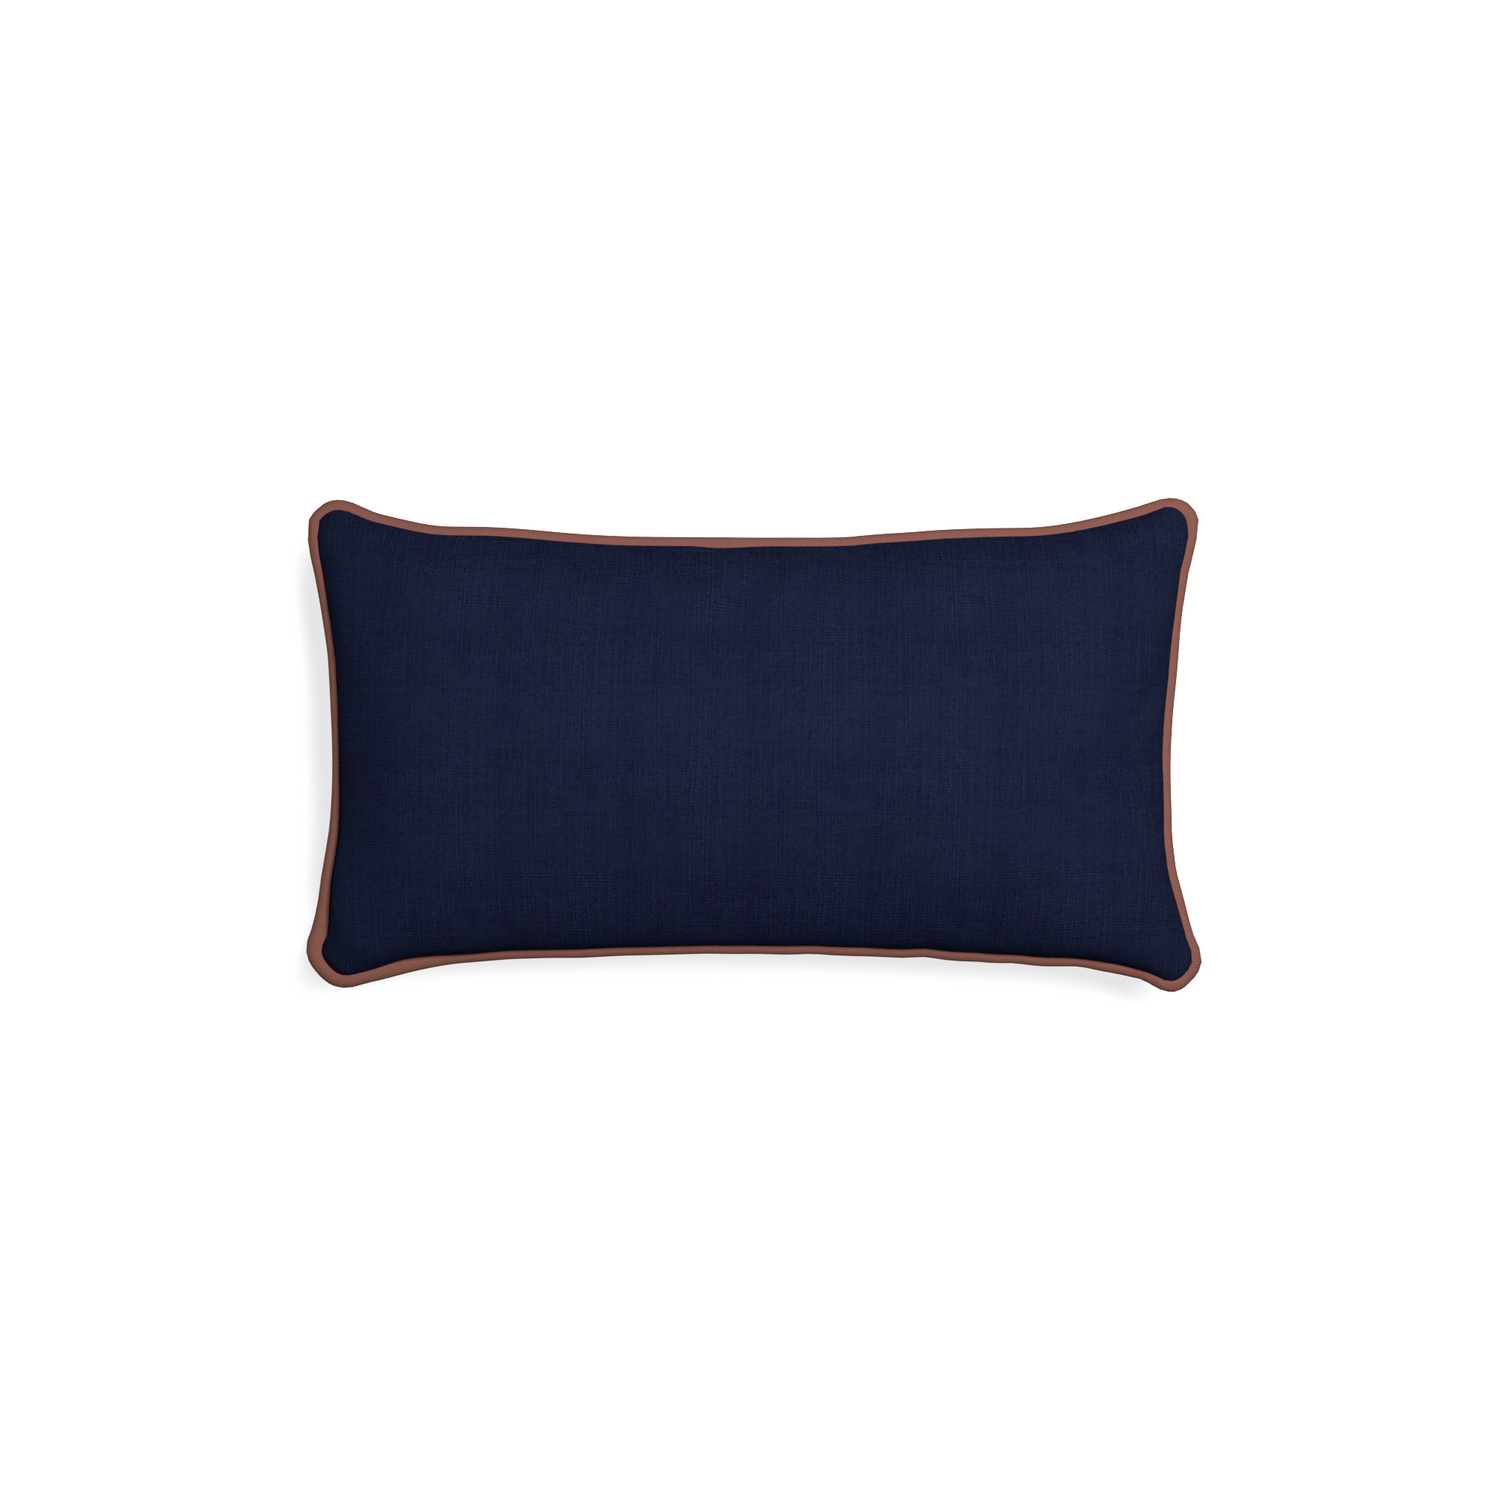 Petite-lumbar midnight custom navy bluepillow with w piping on white background